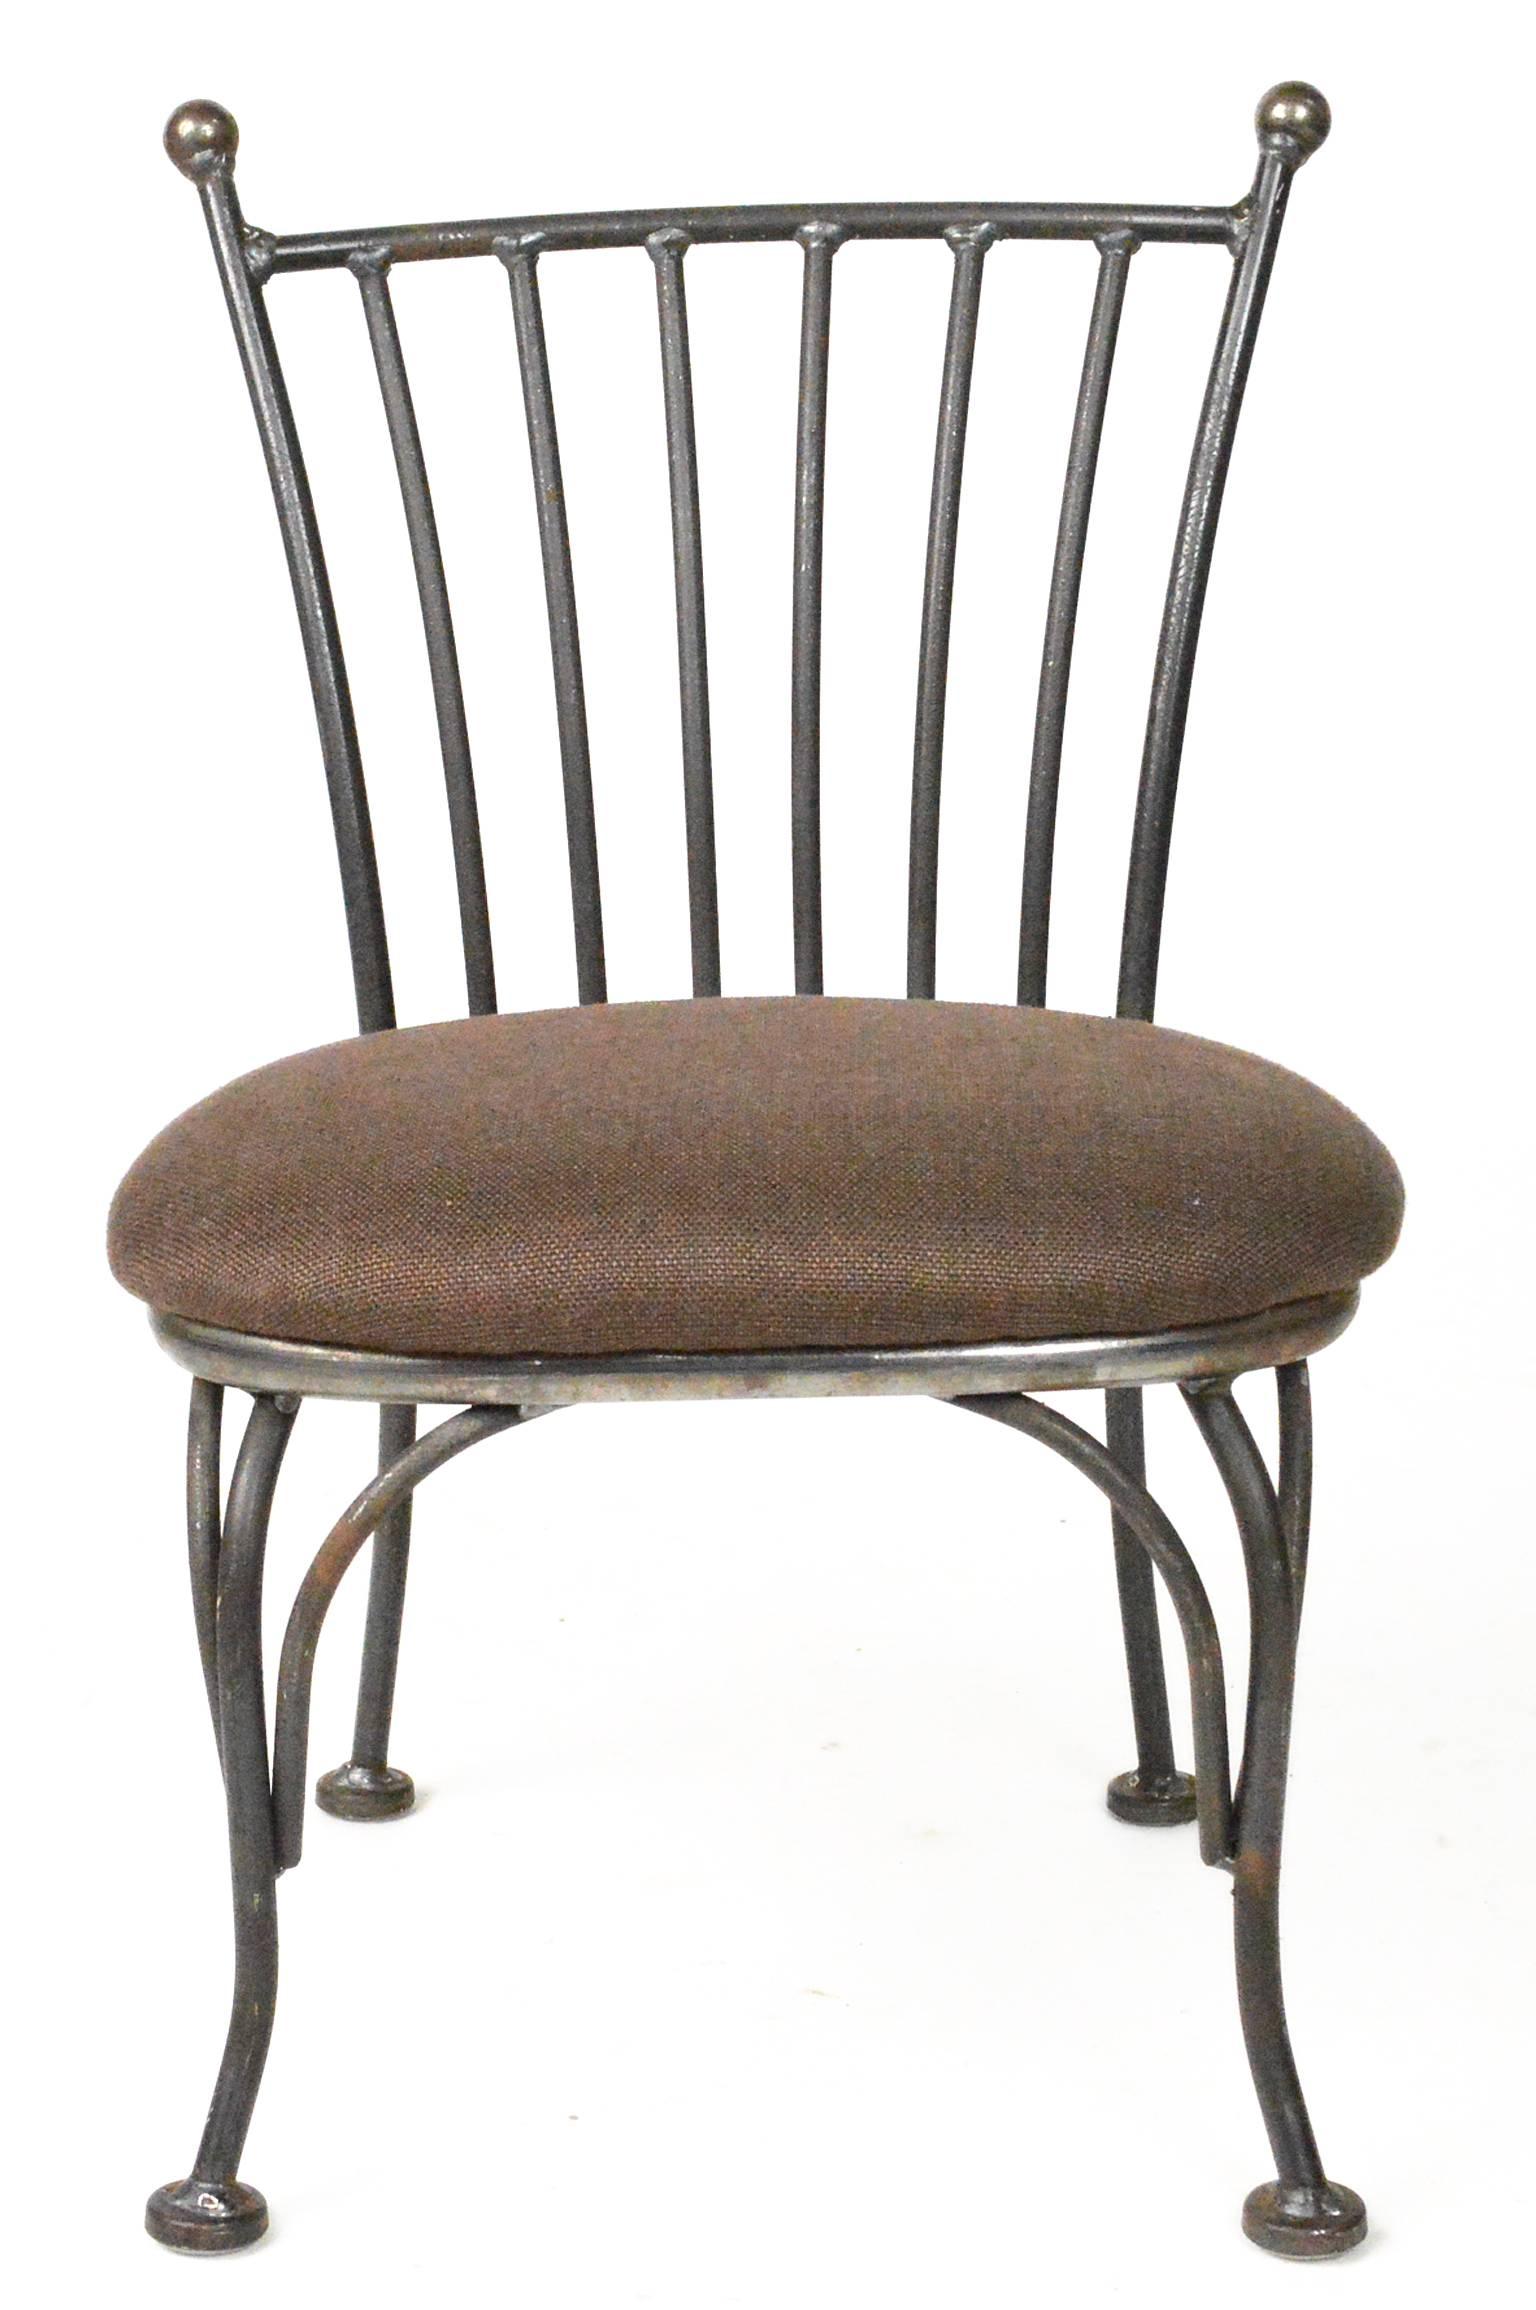 Pair of child's iron bistro chairs with brown tweed upholstery.